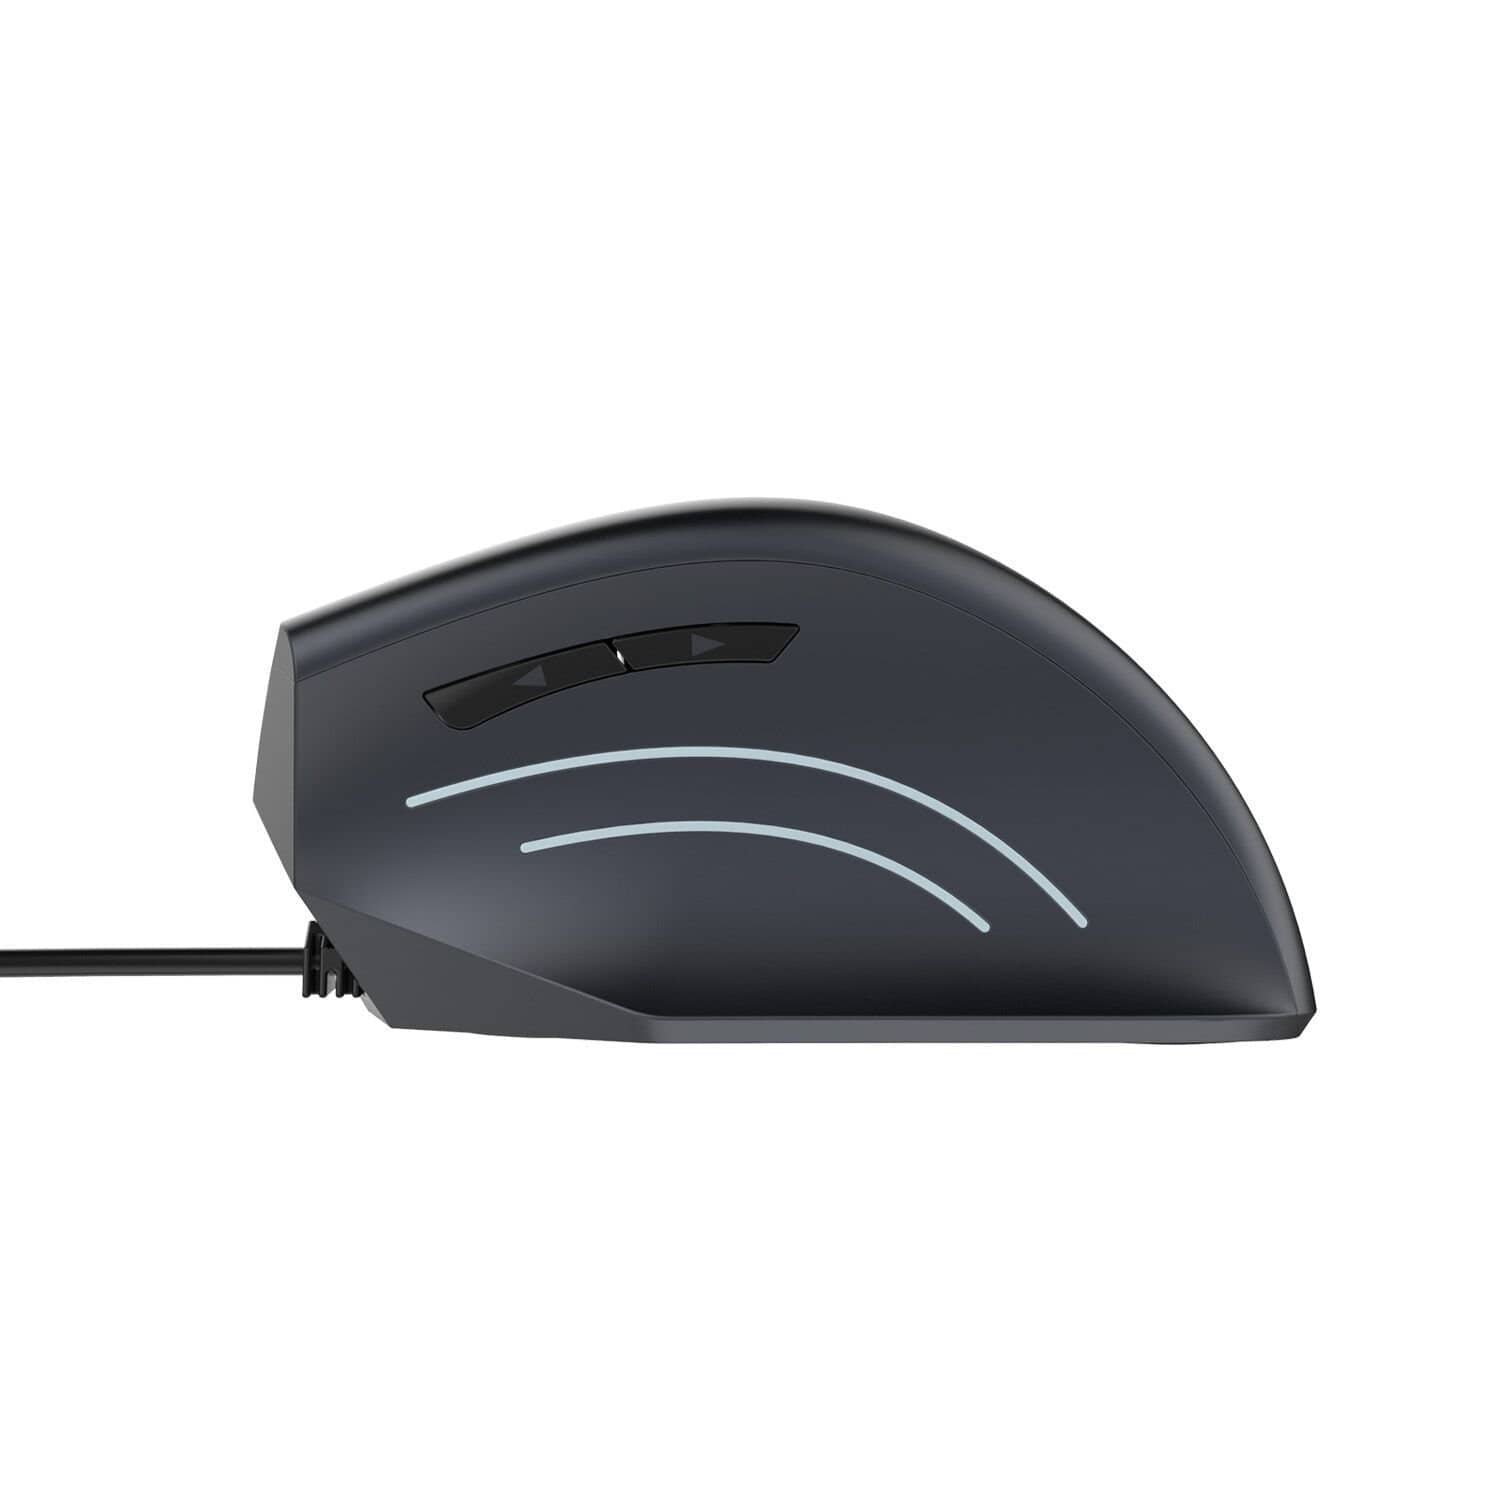 Sharkk Mouse Wired Ergonomic Vertical Mouse